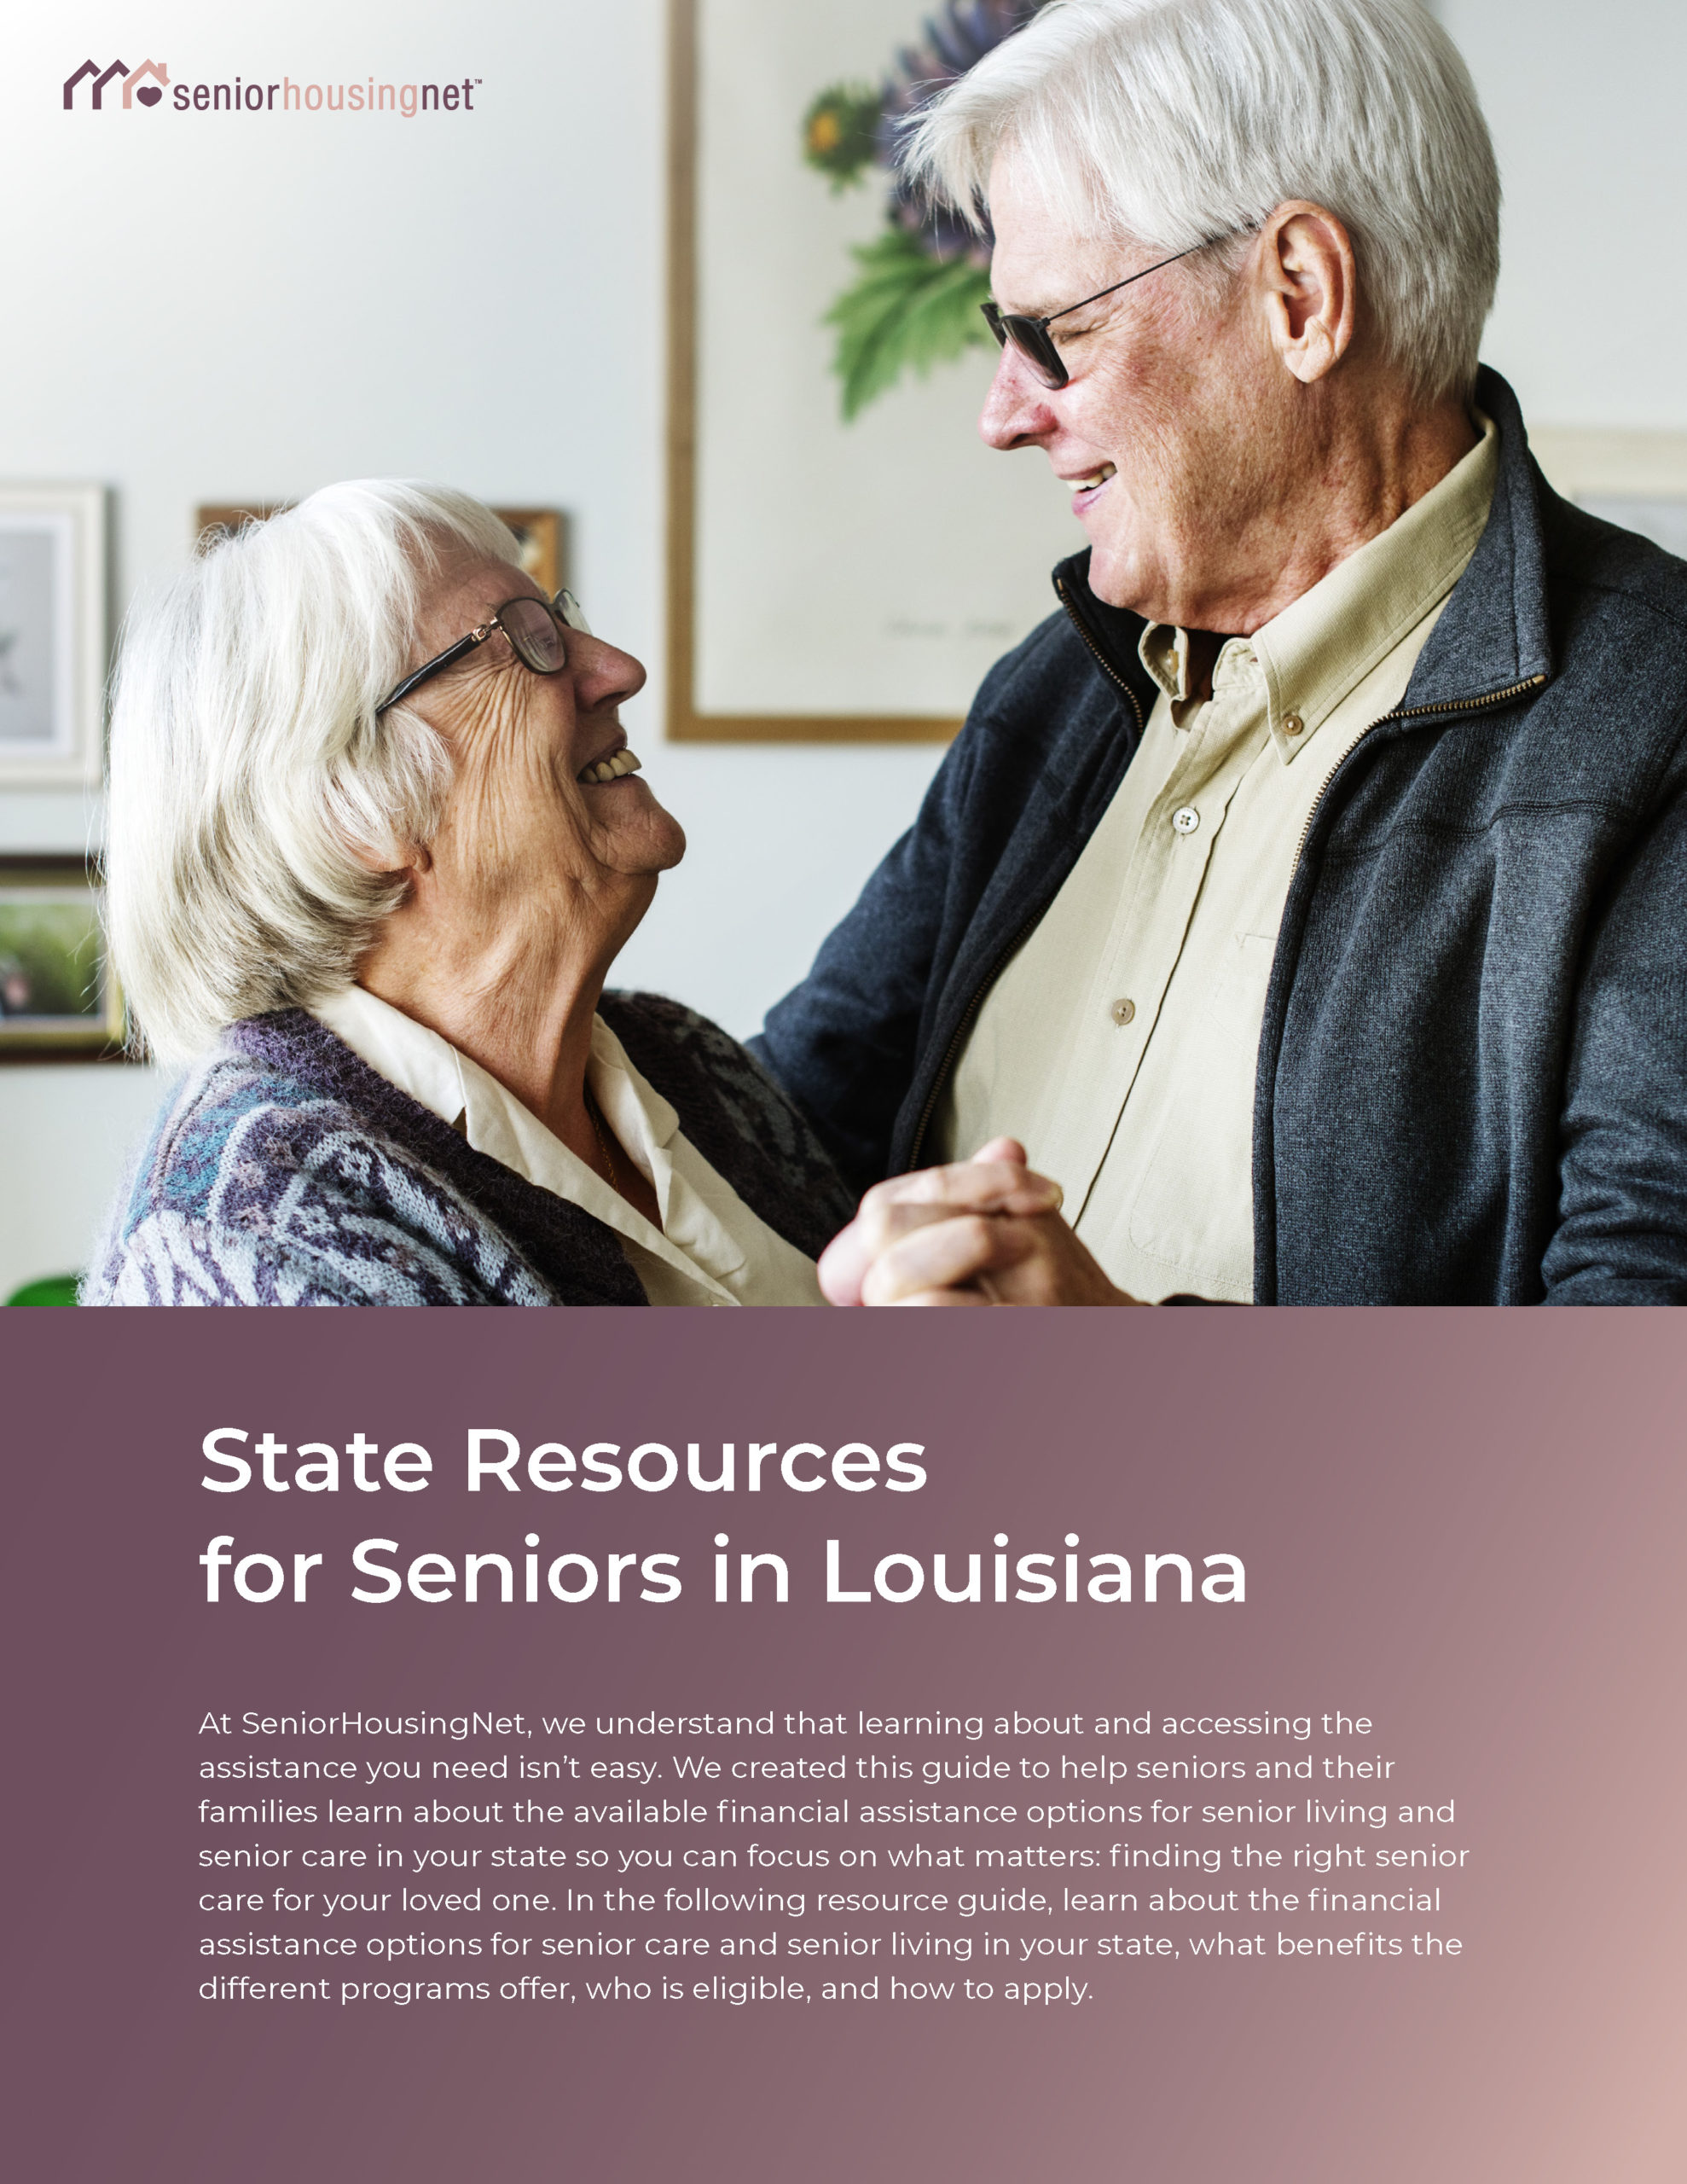 State Resources for Seniors in Louisiana